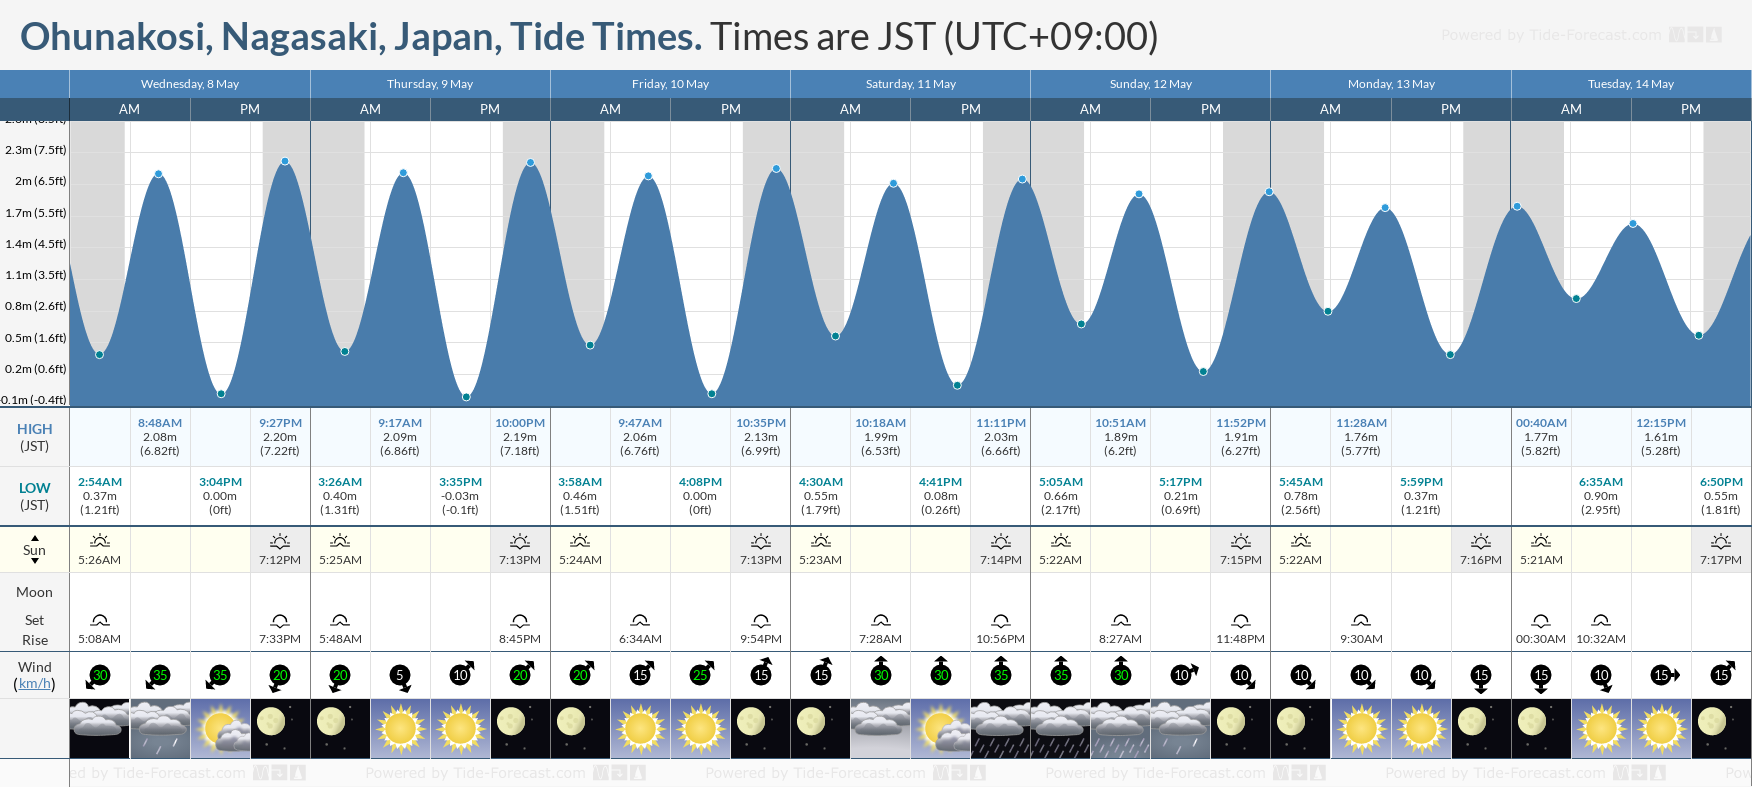 Ohunakosi, Nagasaki, Japan Tide Chart including high and low tide times for the next 7 days